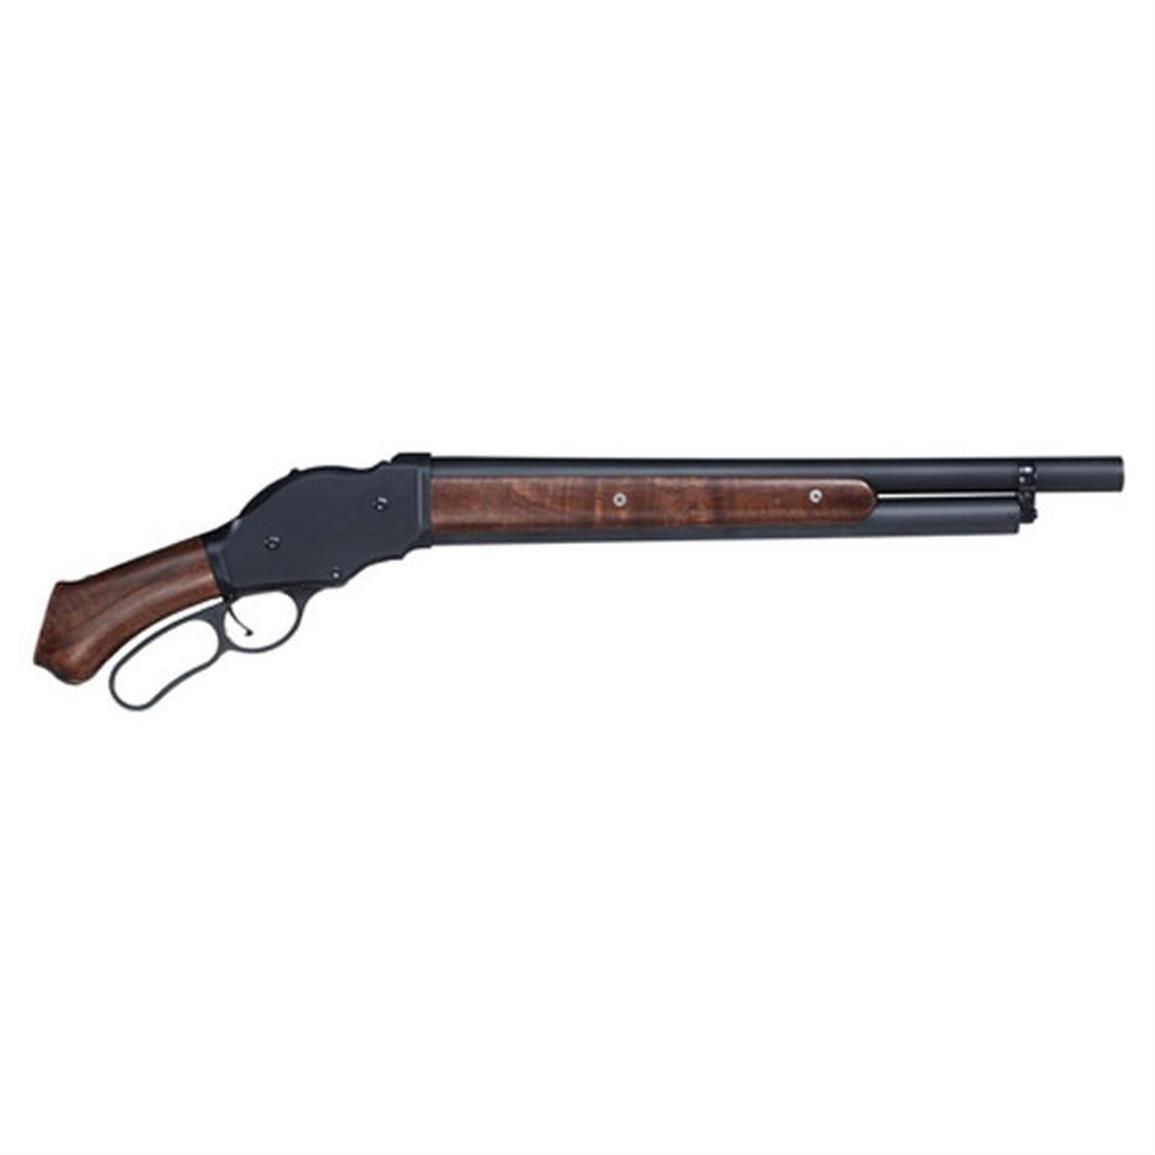 Taylor's & Co. Chiappa Winchester 1887 Bootleg, Lever Action, 12 Gauge, 18.5" Barrel, 5+1 Rounds